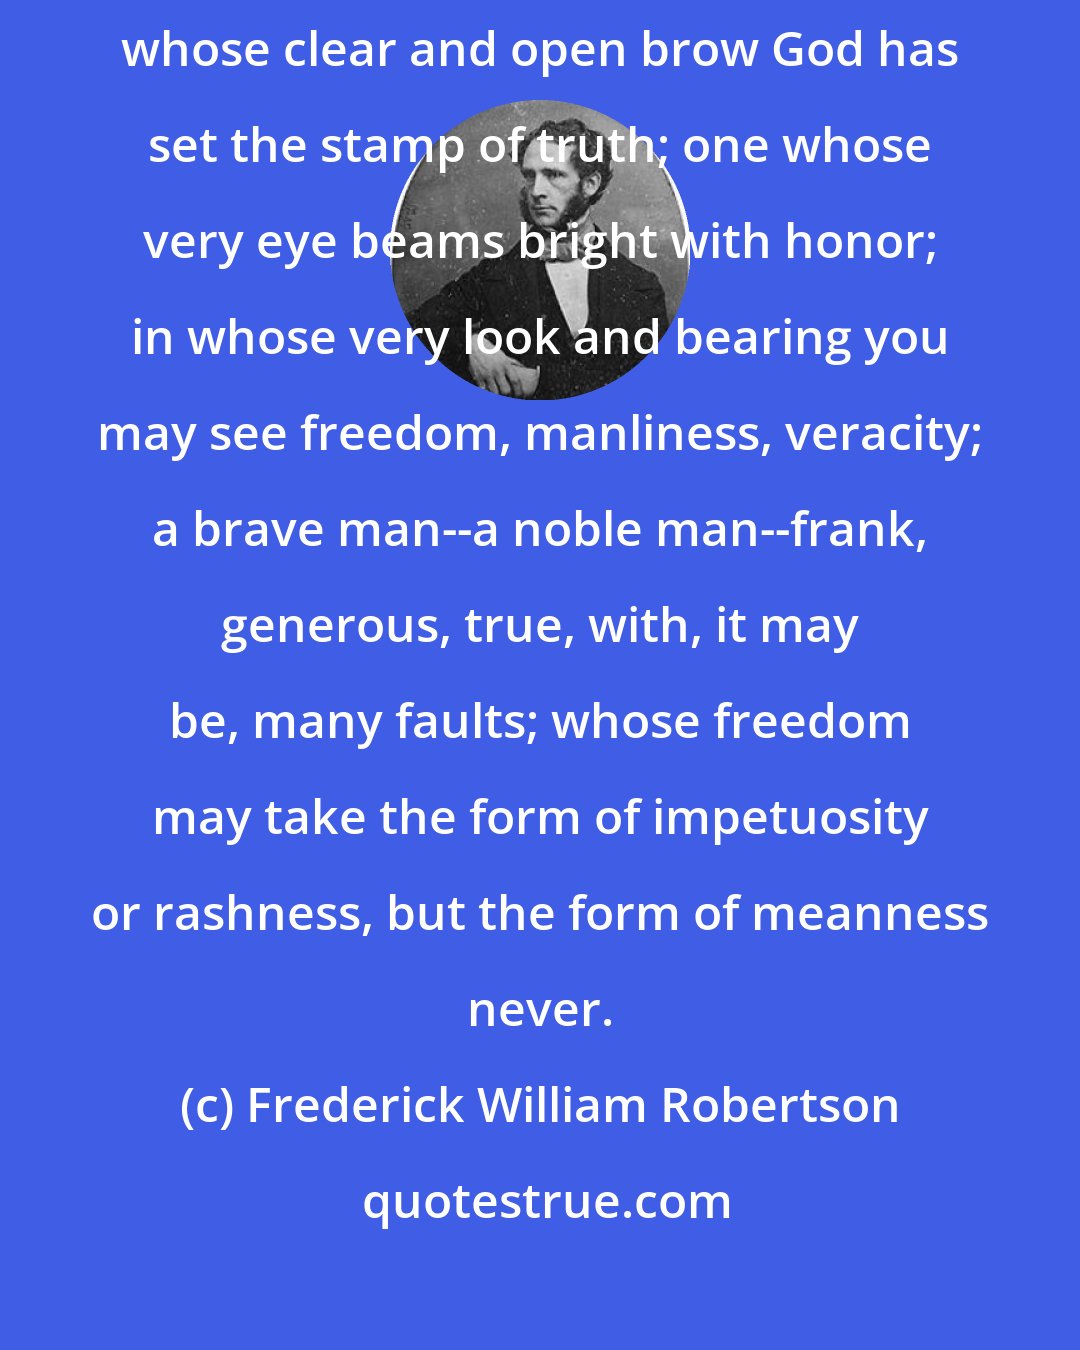 Frederick William Robertson: Now see what a Christian is, drawn by the hand of Christ. He is a man on whose clear and open brow God has set the stamp of truth; one whose very eye beams bright with honor; in whose very look and bearing you may see freedom, manliness, veracity; a brave man--a noble man--frank, generous, true, with, it may be, many faults; whose freedom may take the form of impetuosity or rashness, but the form of meanness never.